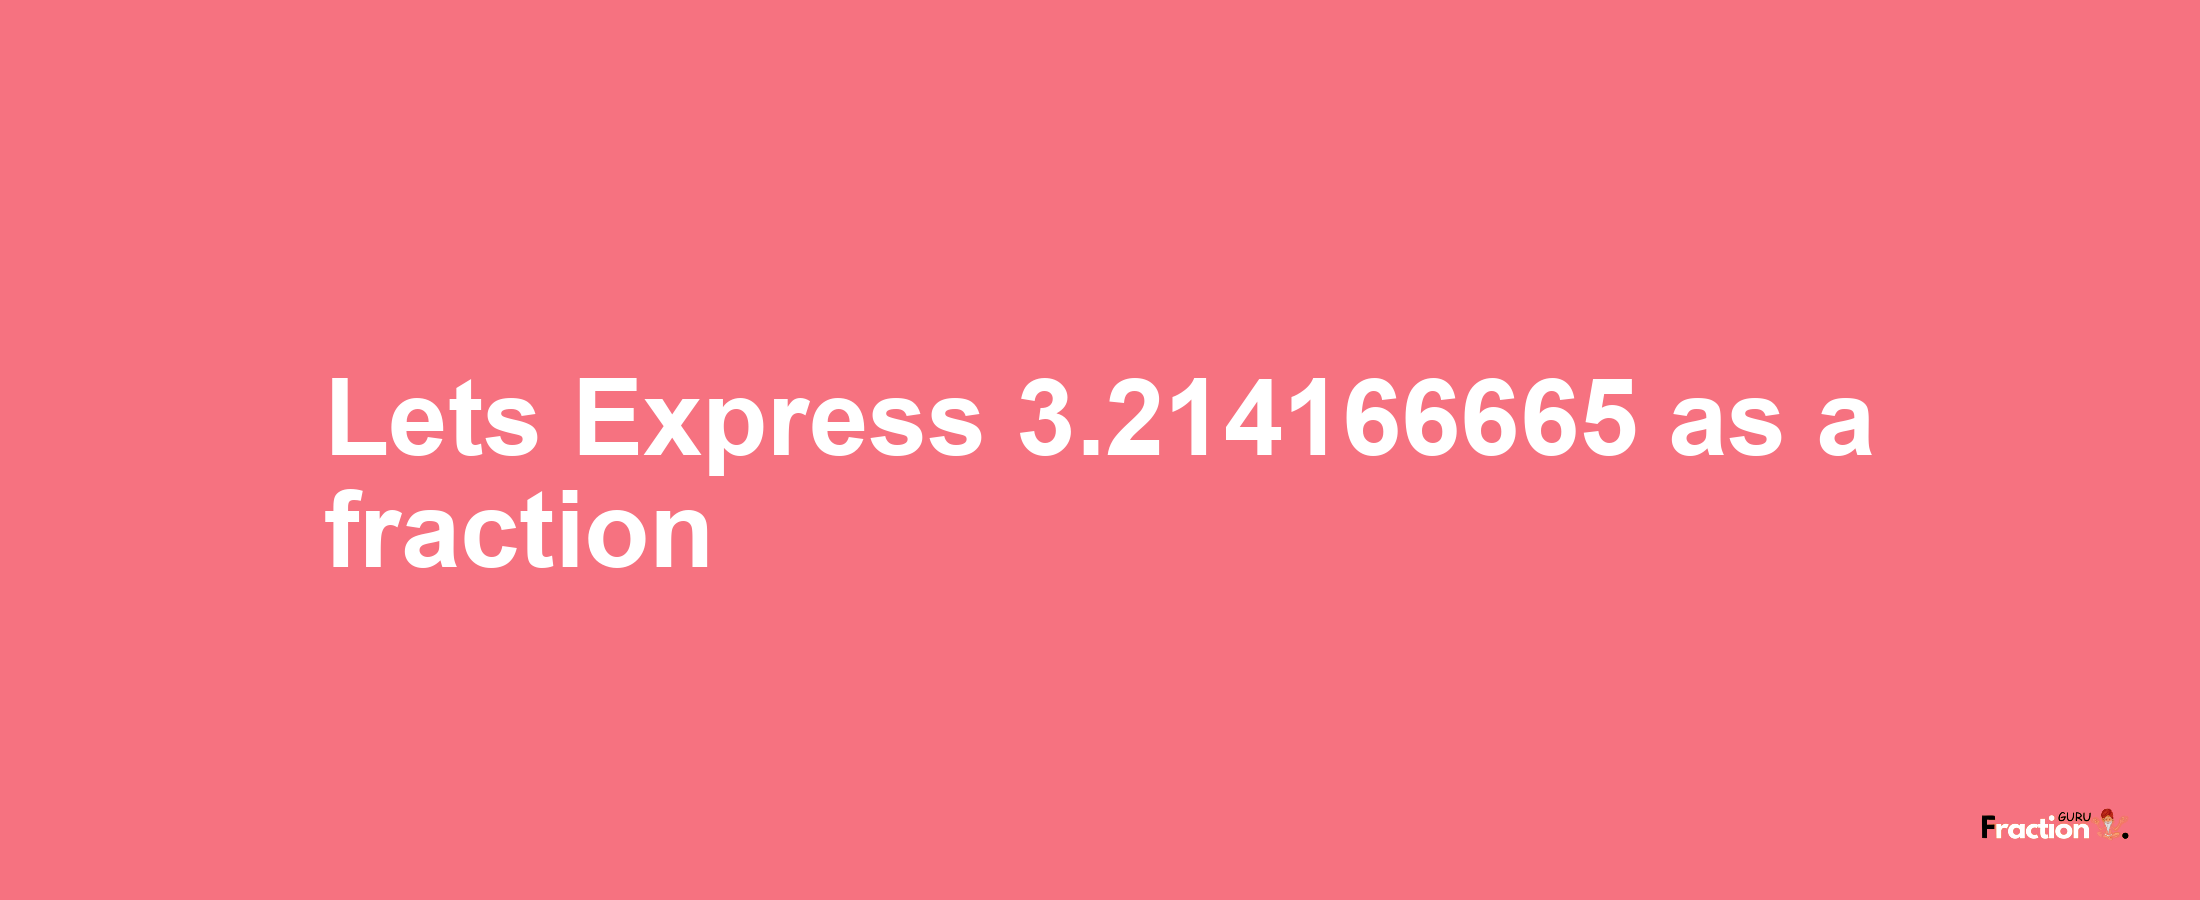 Lets Express 3.214166665 as afraction